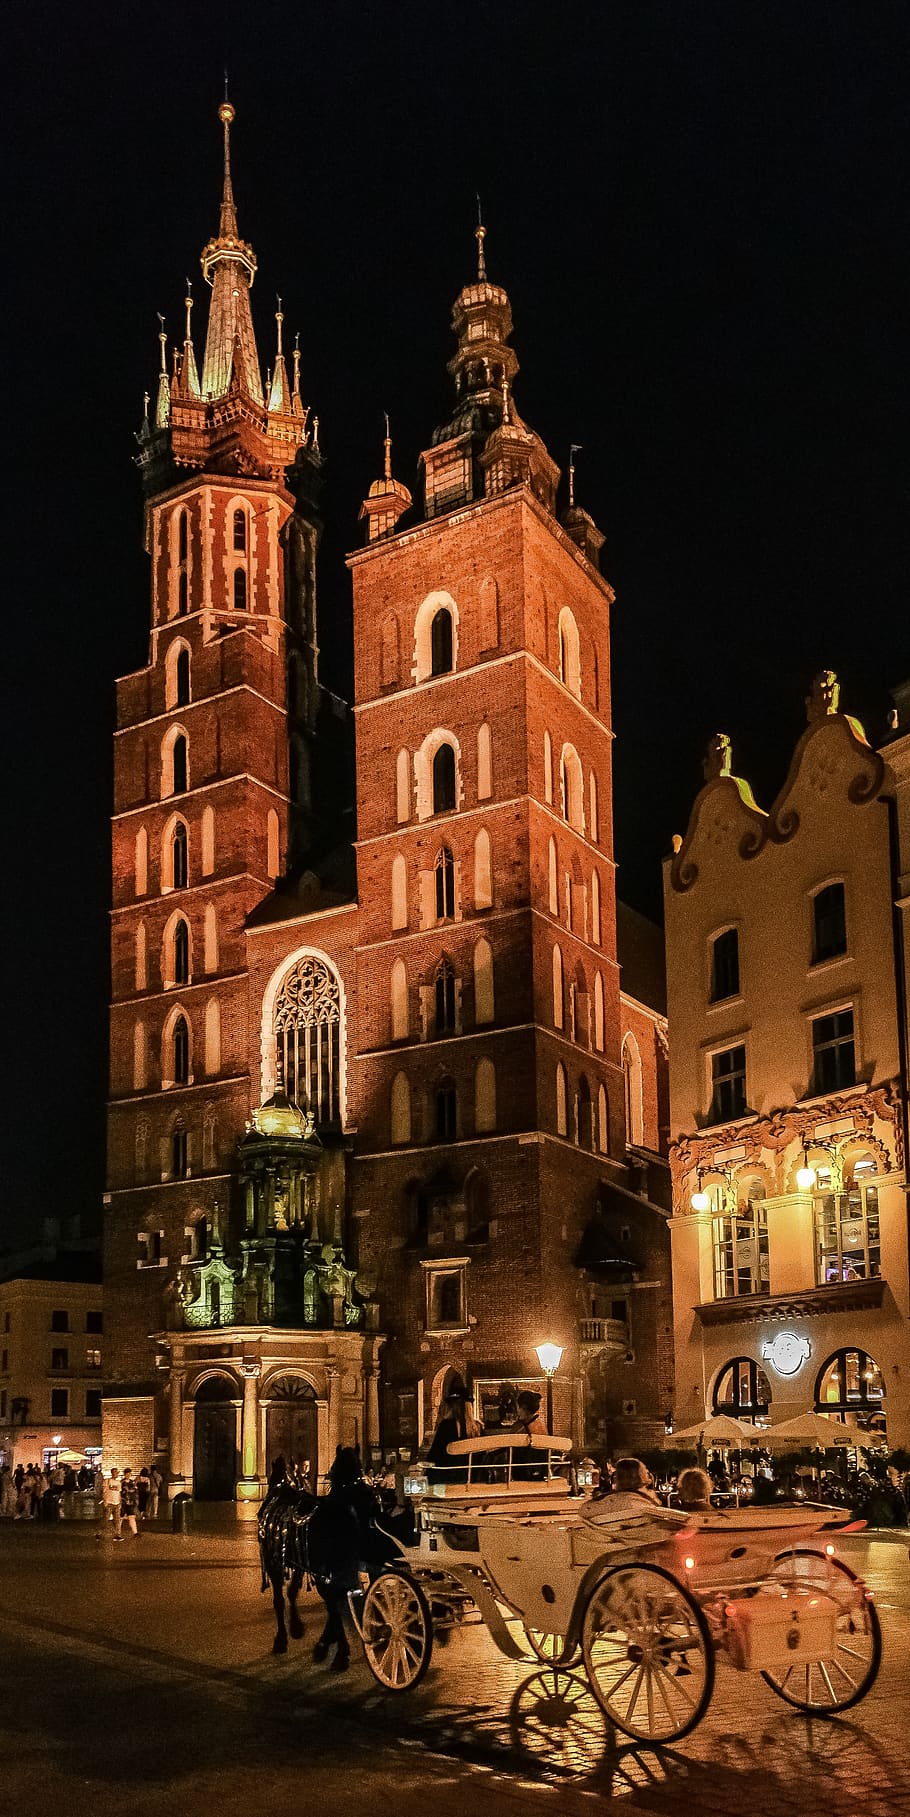 church, belfry, architecture, religion, christianity, cathedral, building, tower, night, square